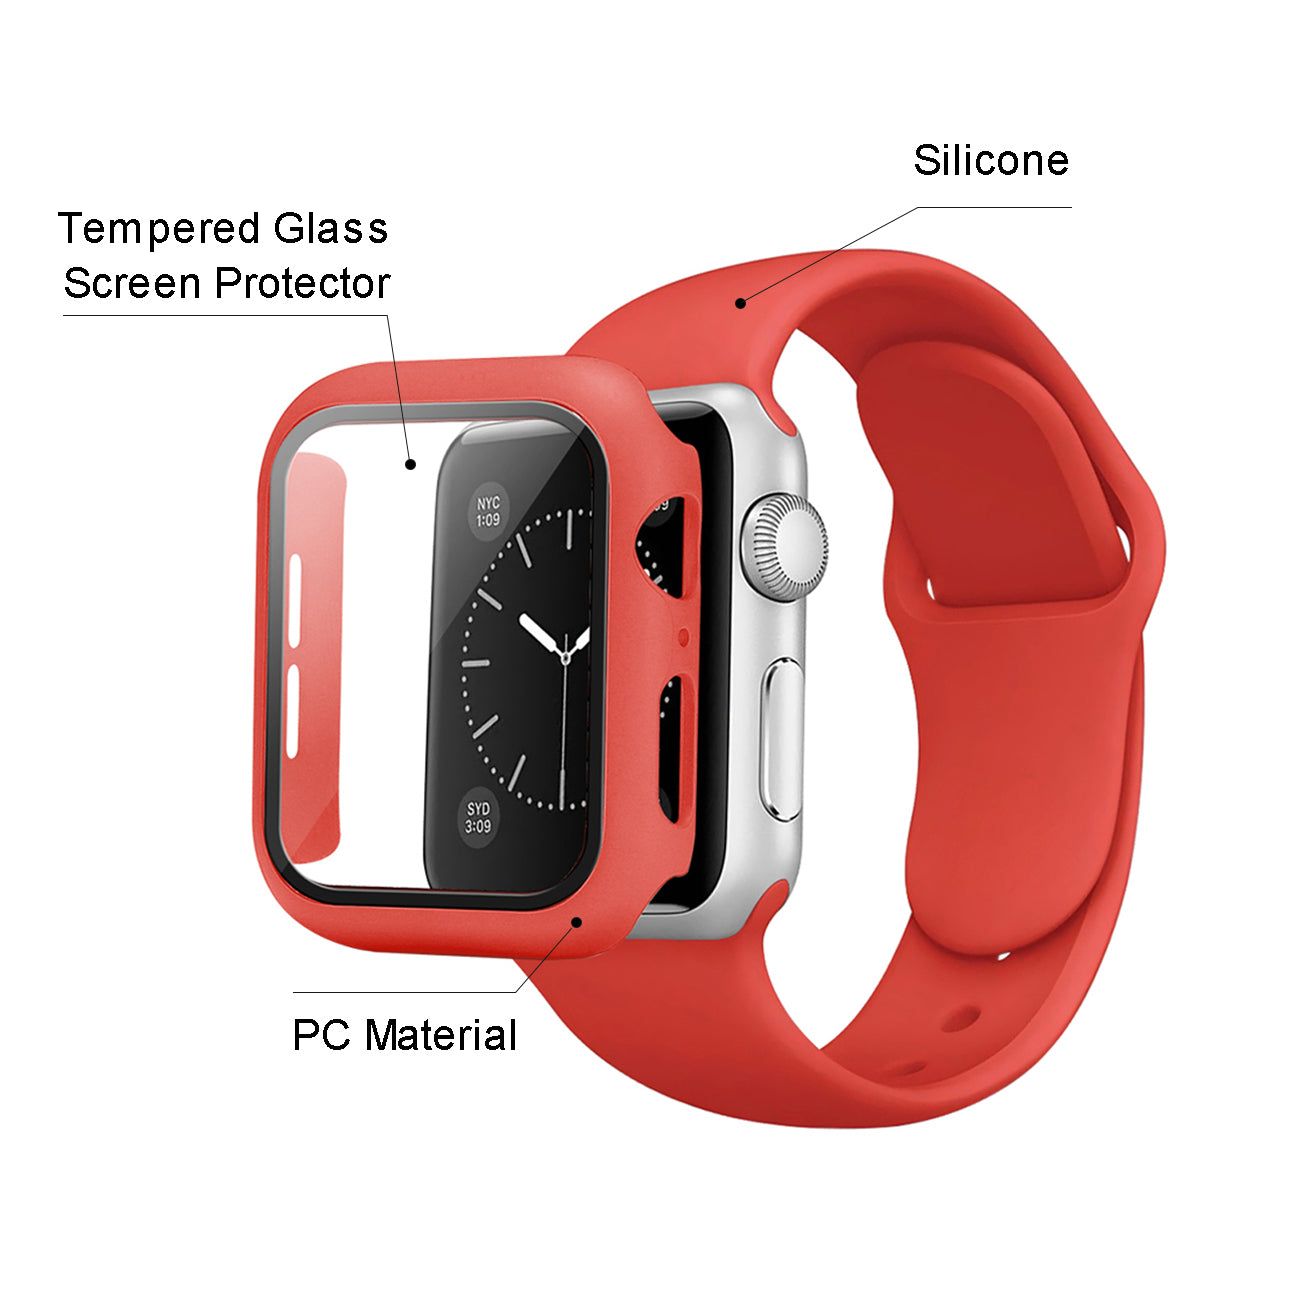 Watch Case PC With Glass Screen Protector, Silicone Watch Band Apple Watch 38mm Red Color